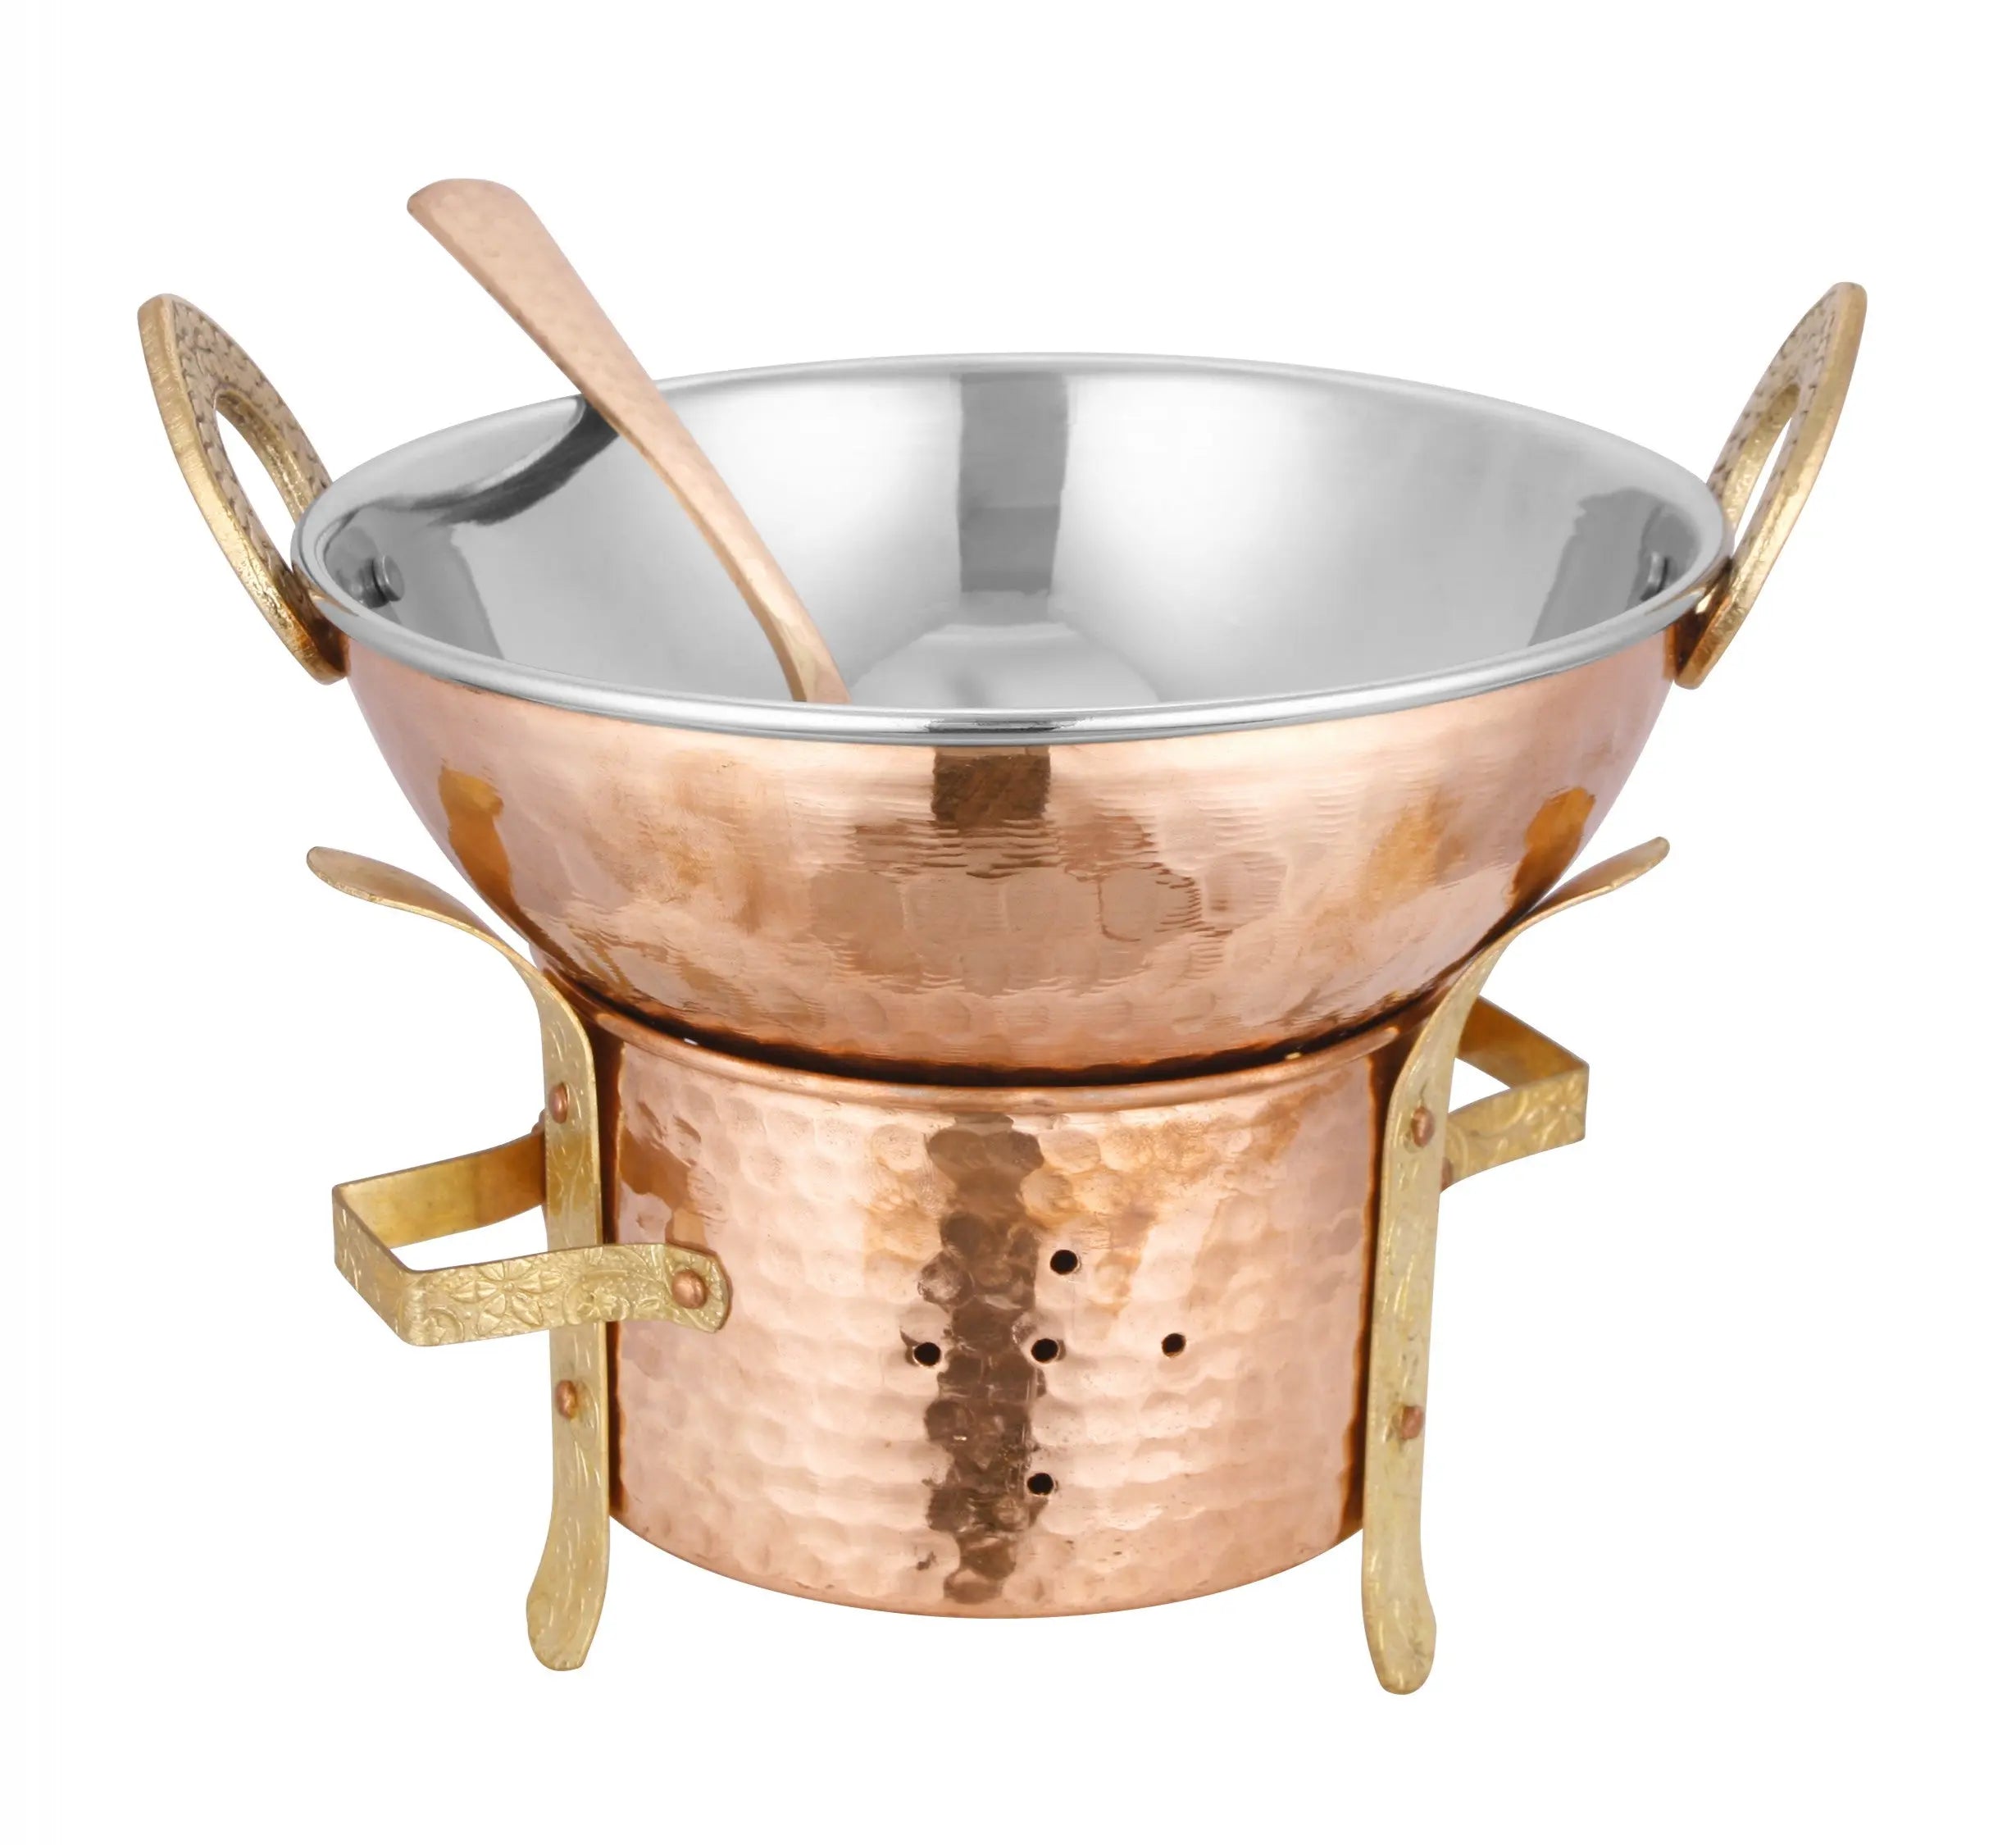 Copper Karhai Serving Set Pot Pan For Cooking - CROCKERY WALA AND COMPANY 